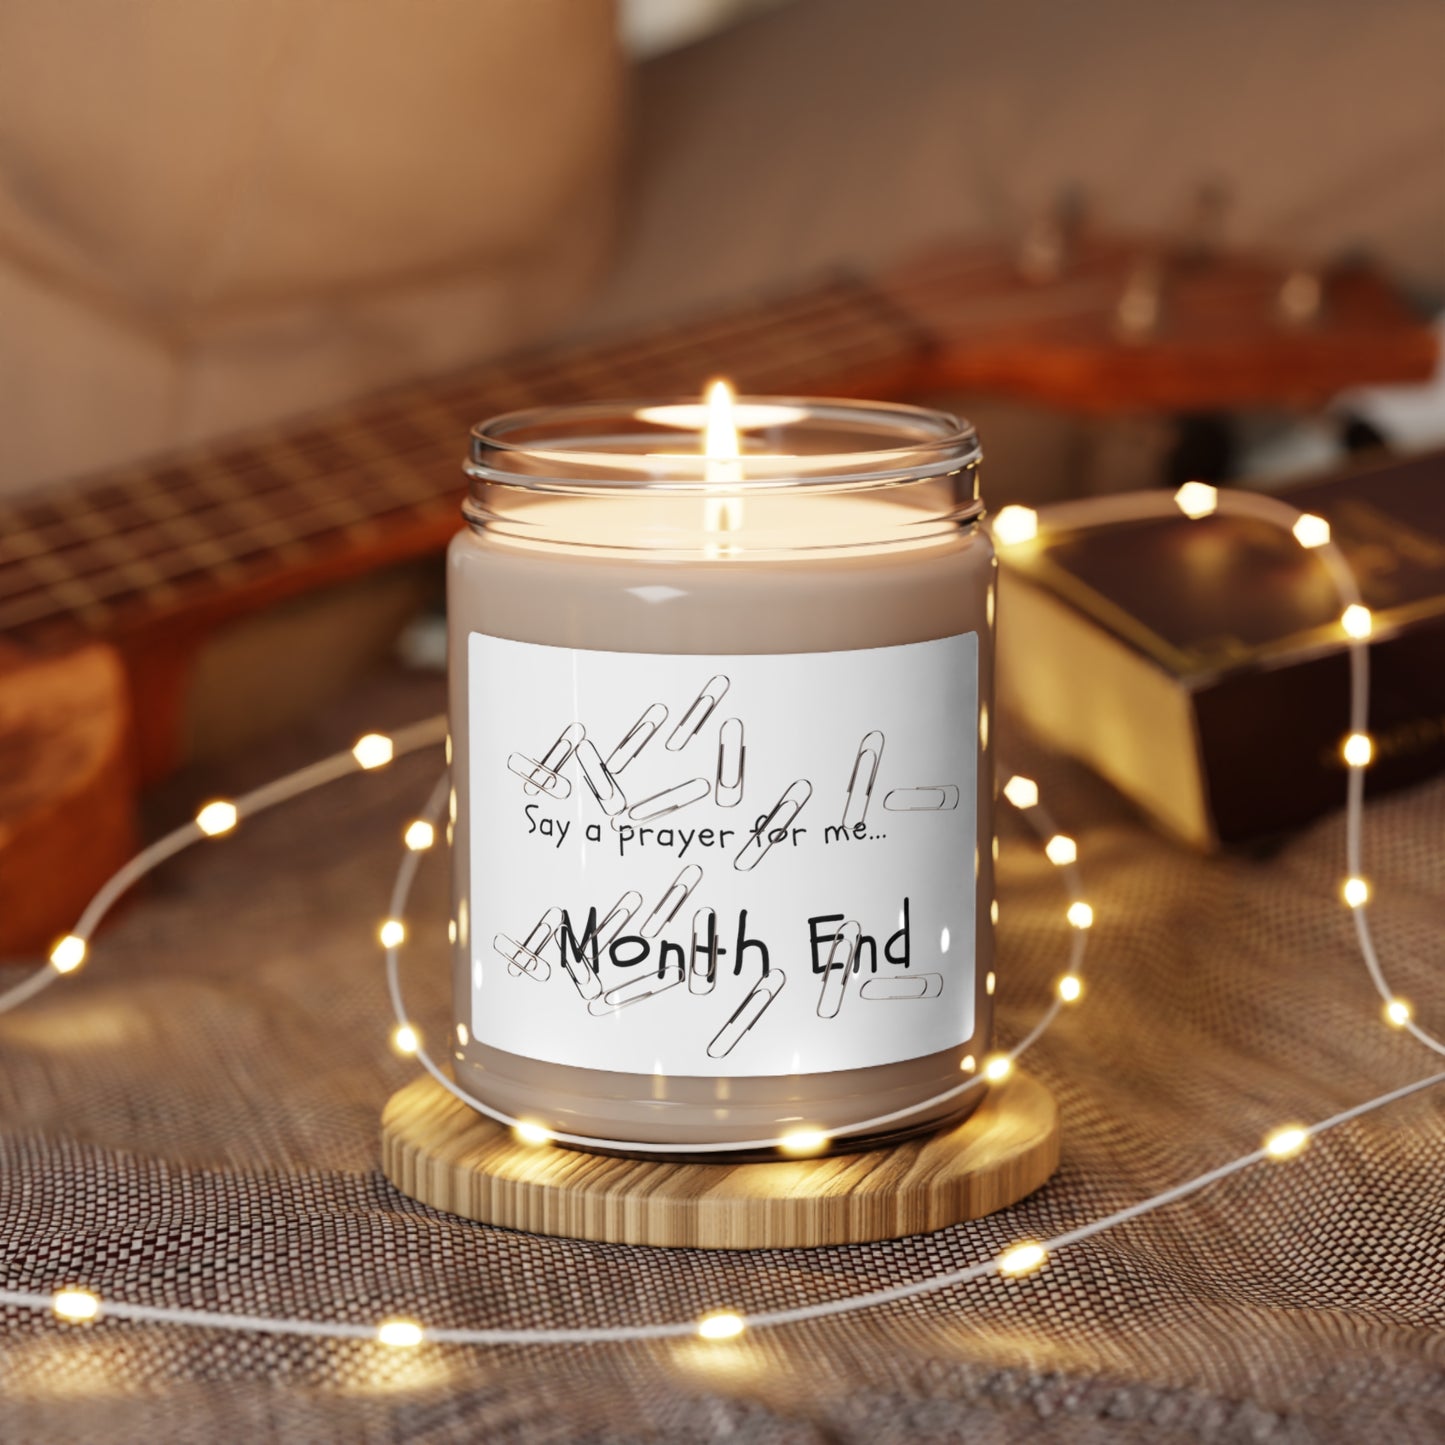 Say a Prayer for Me Month End Scented Soy Candle, 9oz